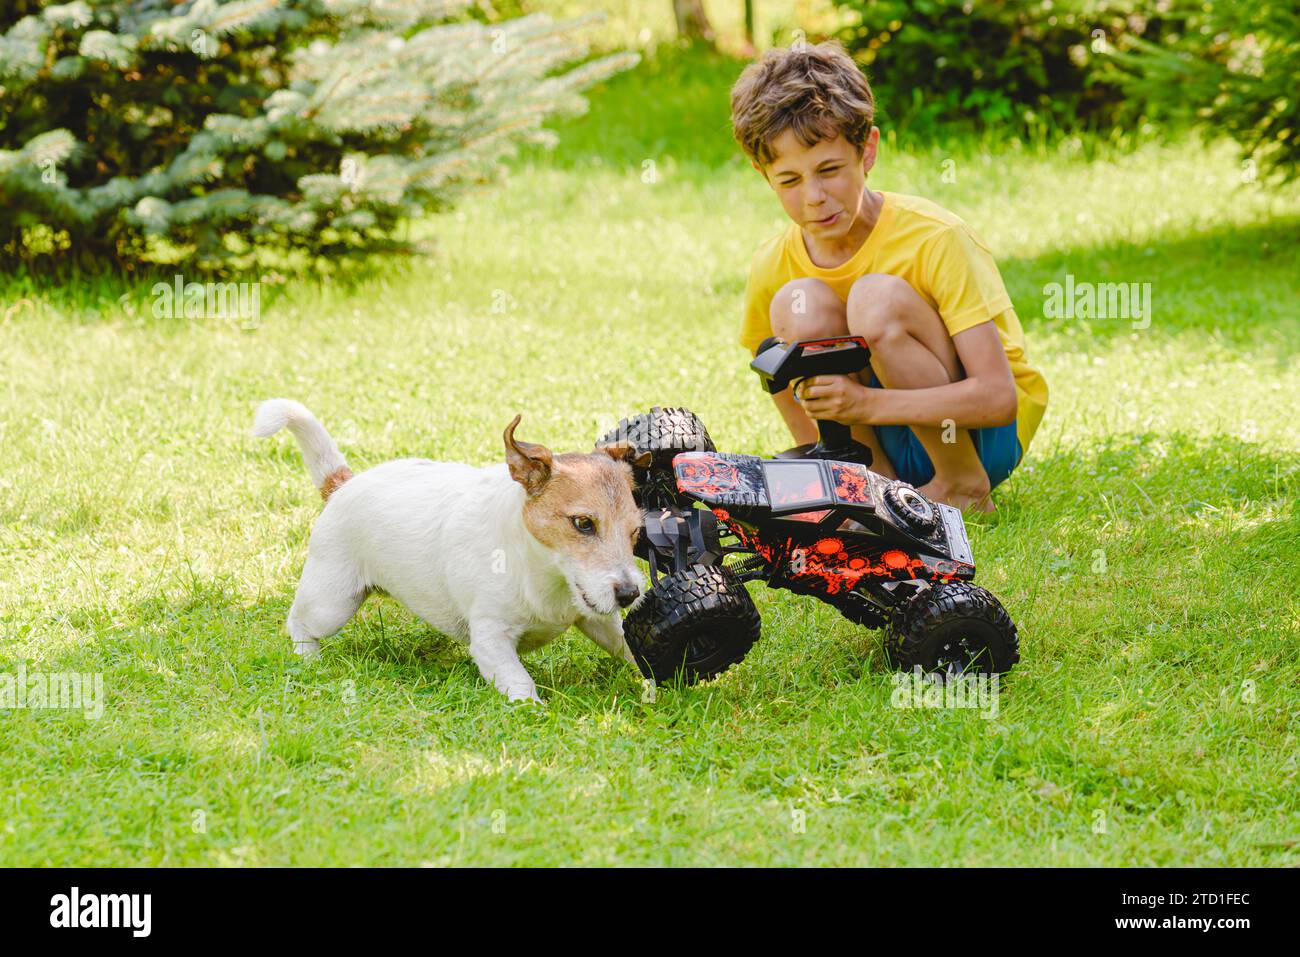 Kid playing with RC (radio controlled) toy racing car. Dog has got into accident with a car Stock Photo